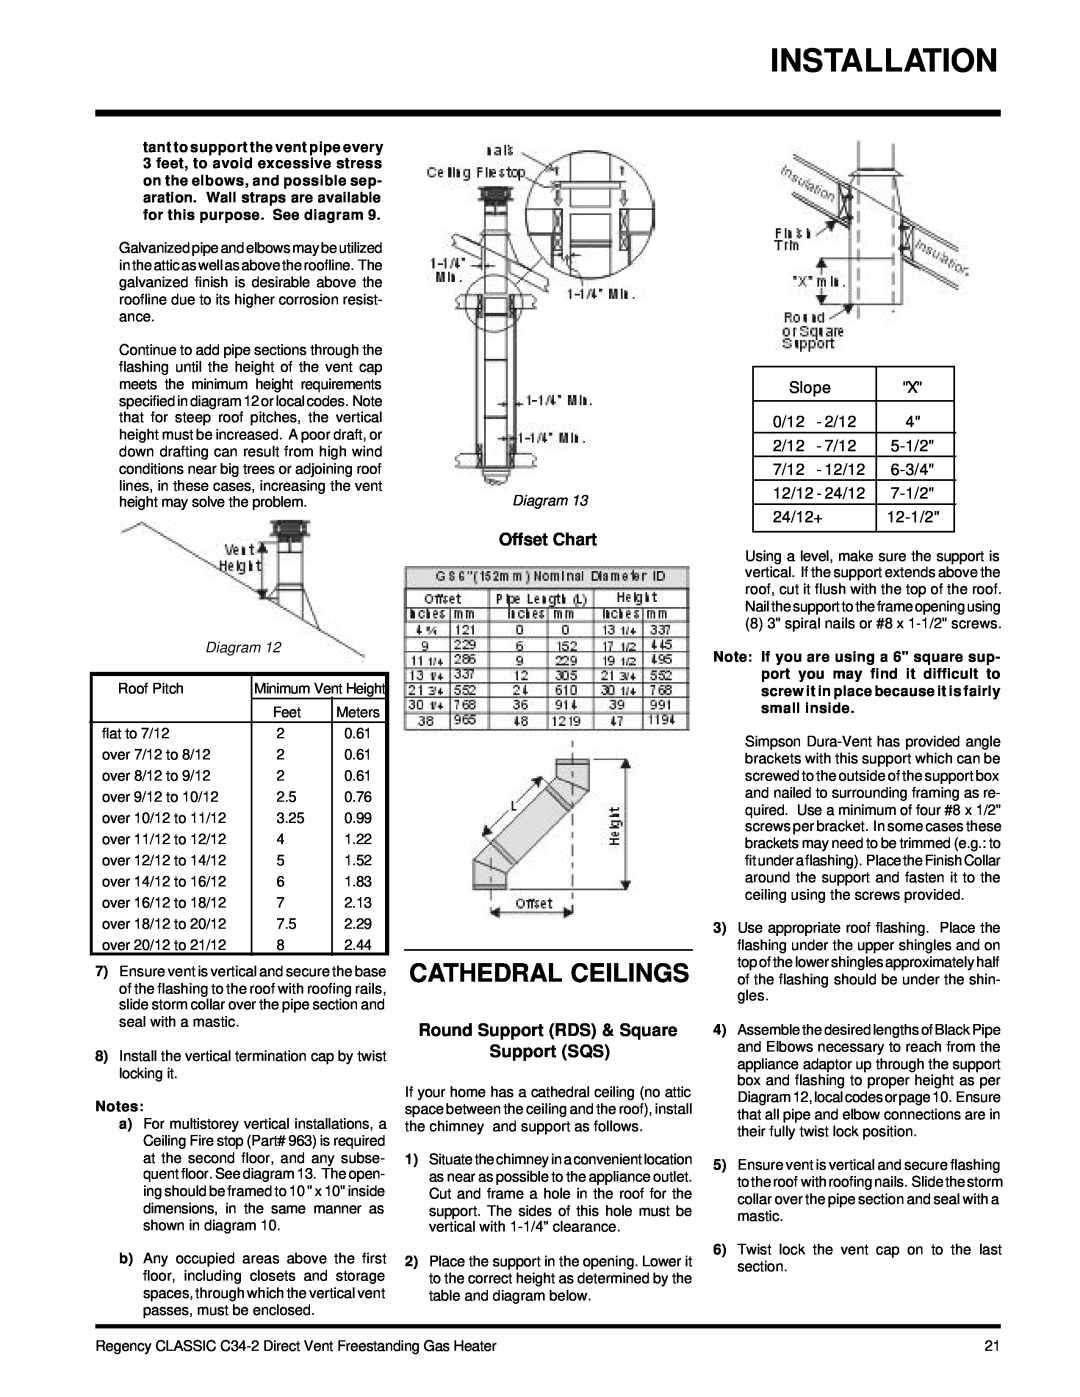 Regency C34-LP2, C34-NG2 Installation, Cathedral Ceilings, Offset Chart, Round Support RDS & Square Support SQS 